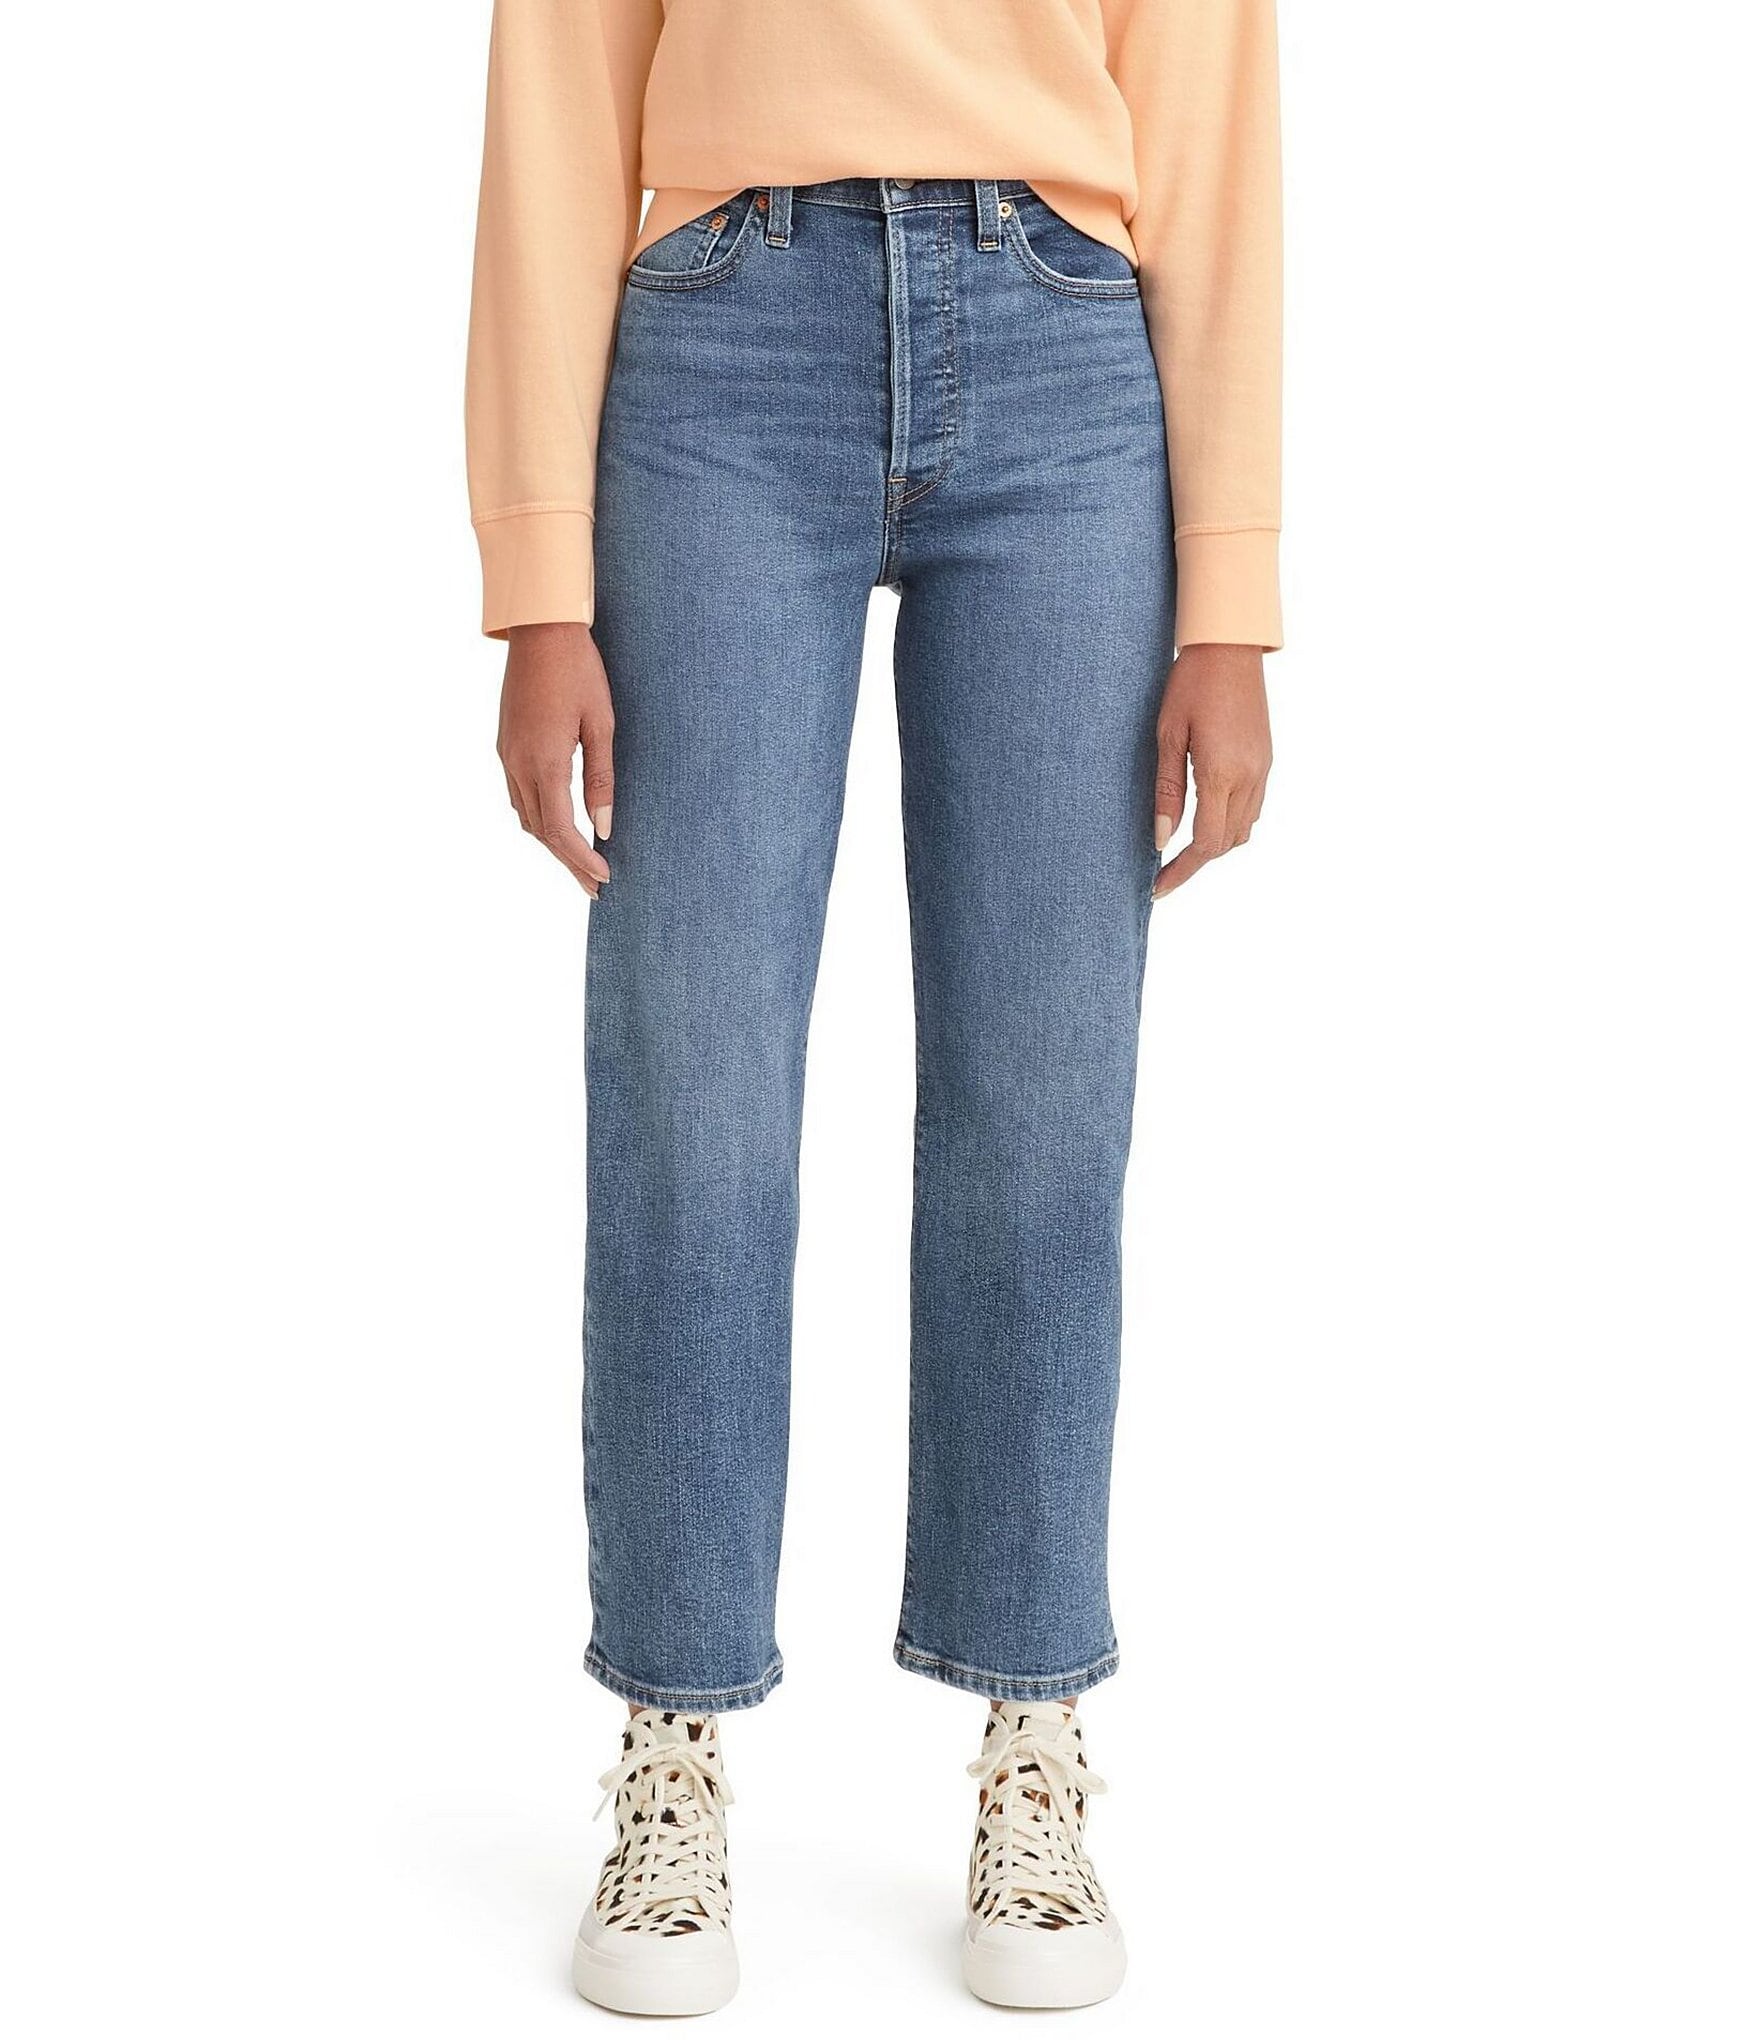 https://dimg.dillards.com/is/image/DillardsZoom/zoom/levis-ribcage-high-rise-straight-ankle-jeans/00000000_zi_3050afe9-5761-4d45-afbb-6f04f6472d49.jpg